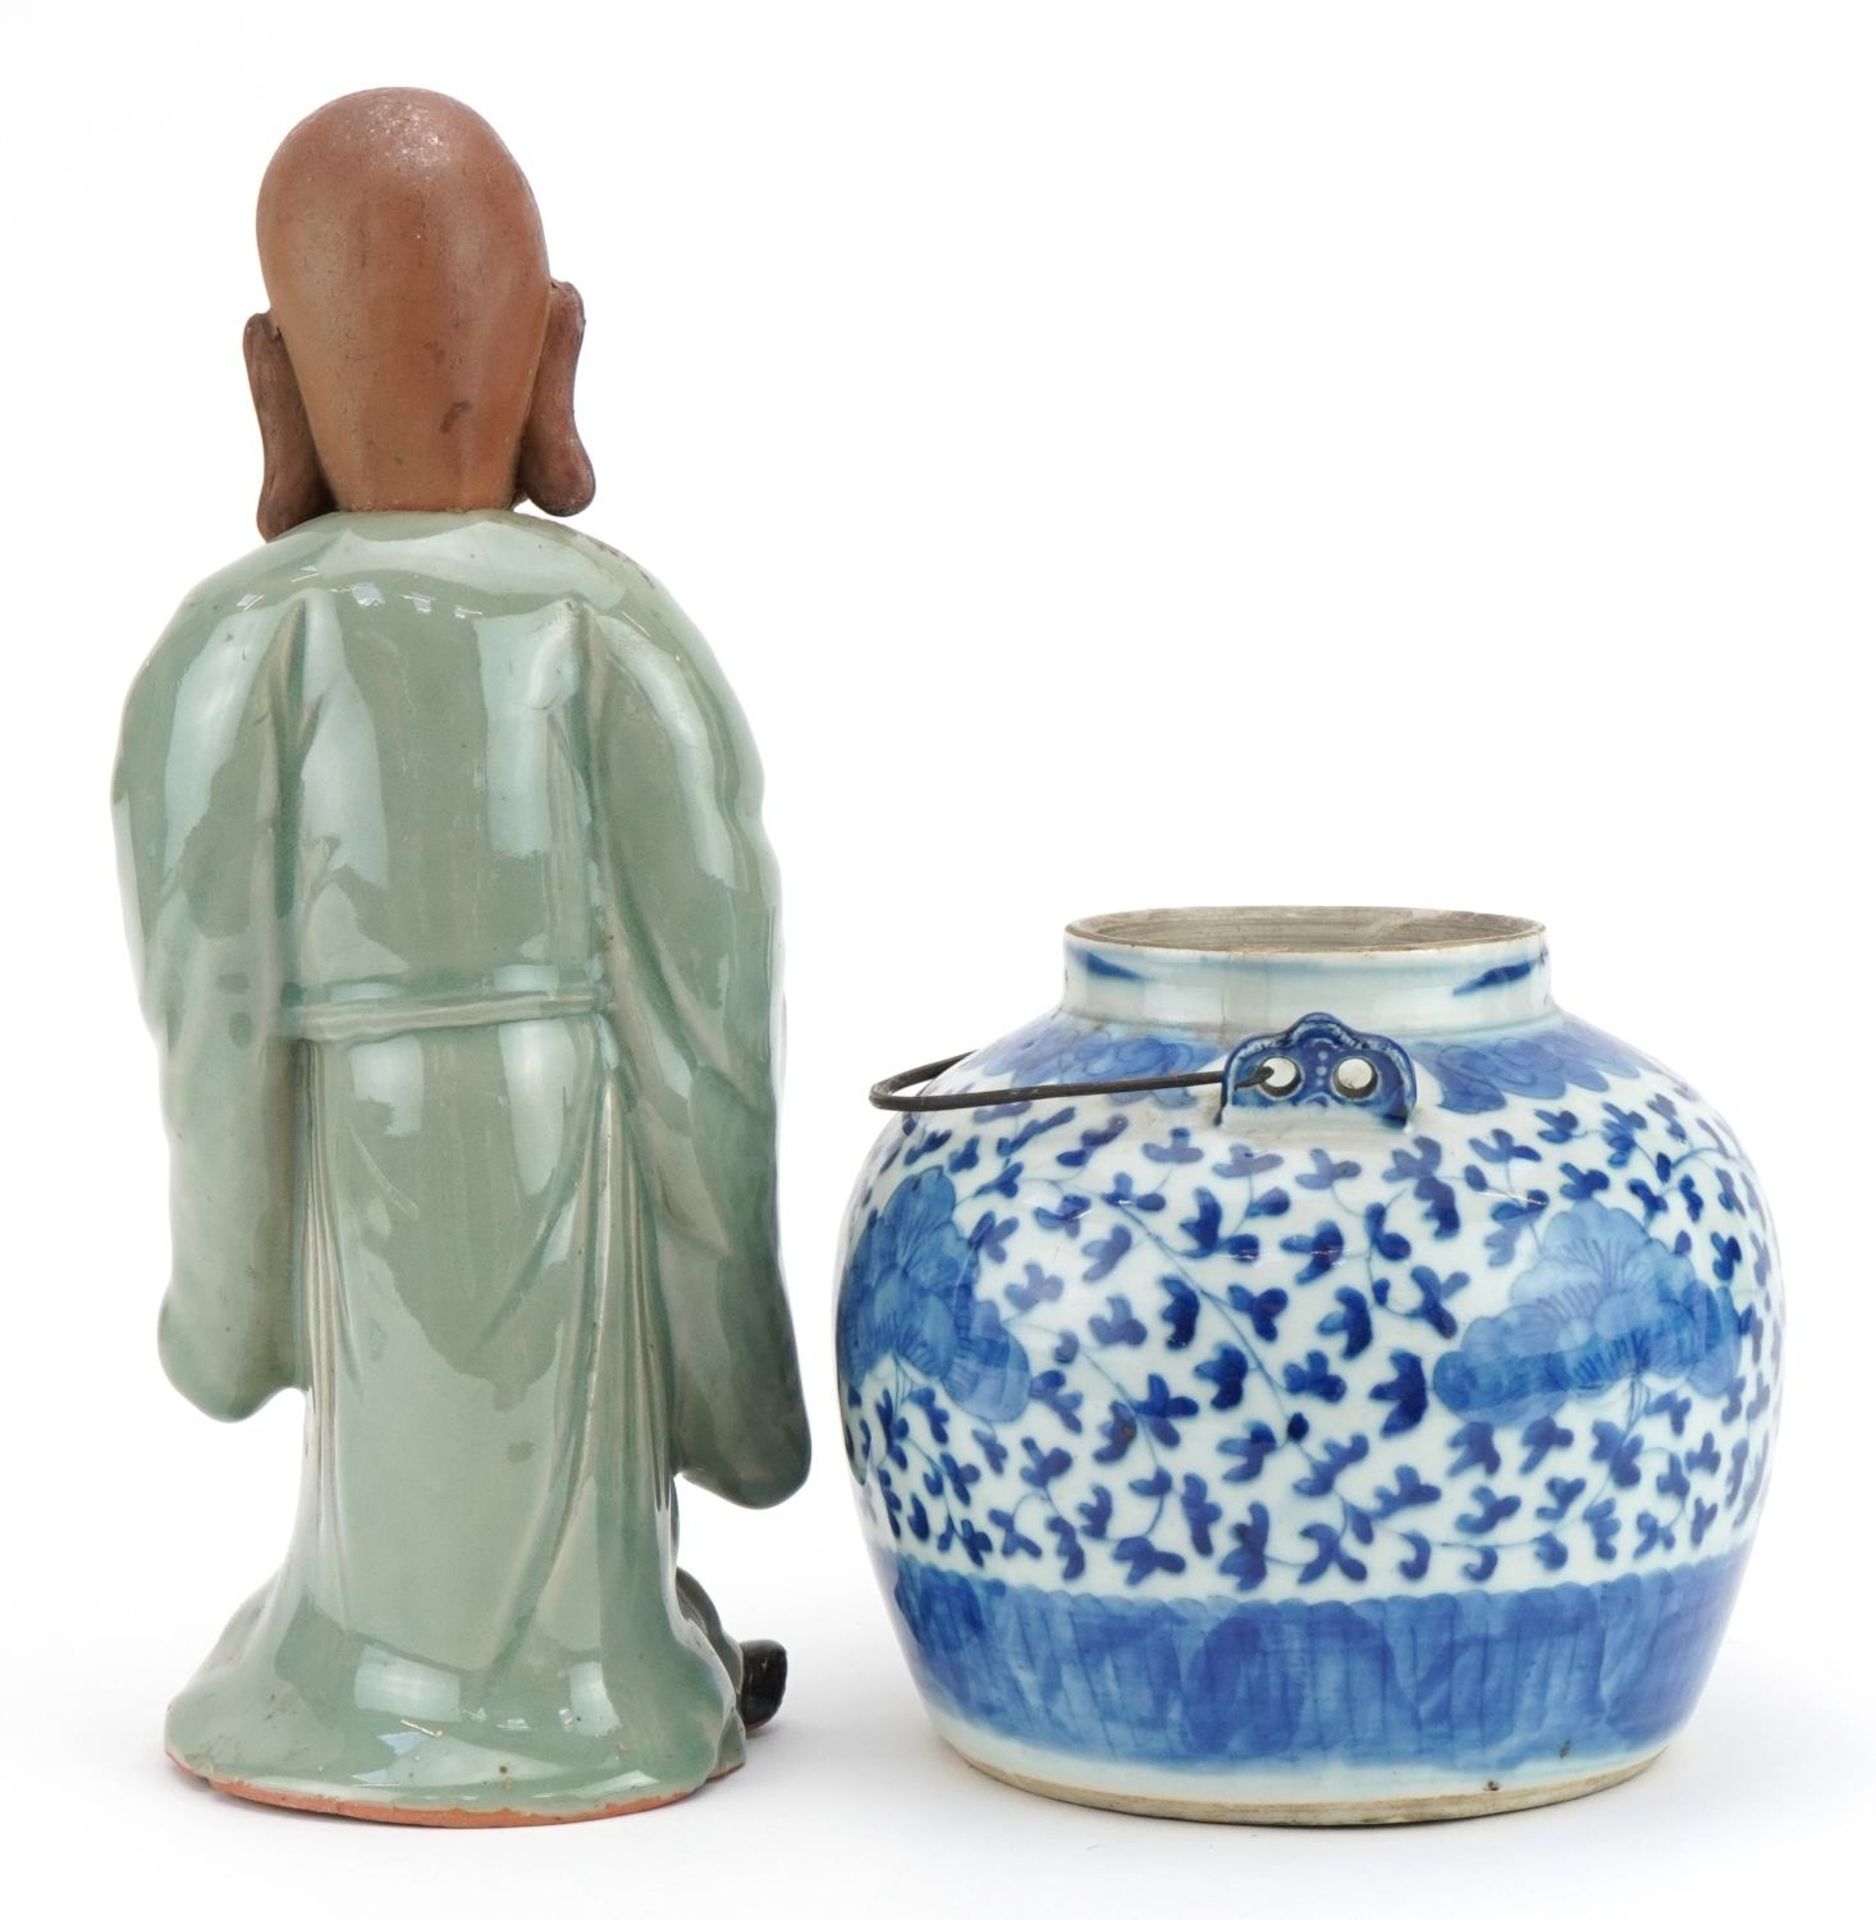 Chinese blue and white porcelain teapot and a celadon glazed figure, the largest 30cm high - Image 4 of 7